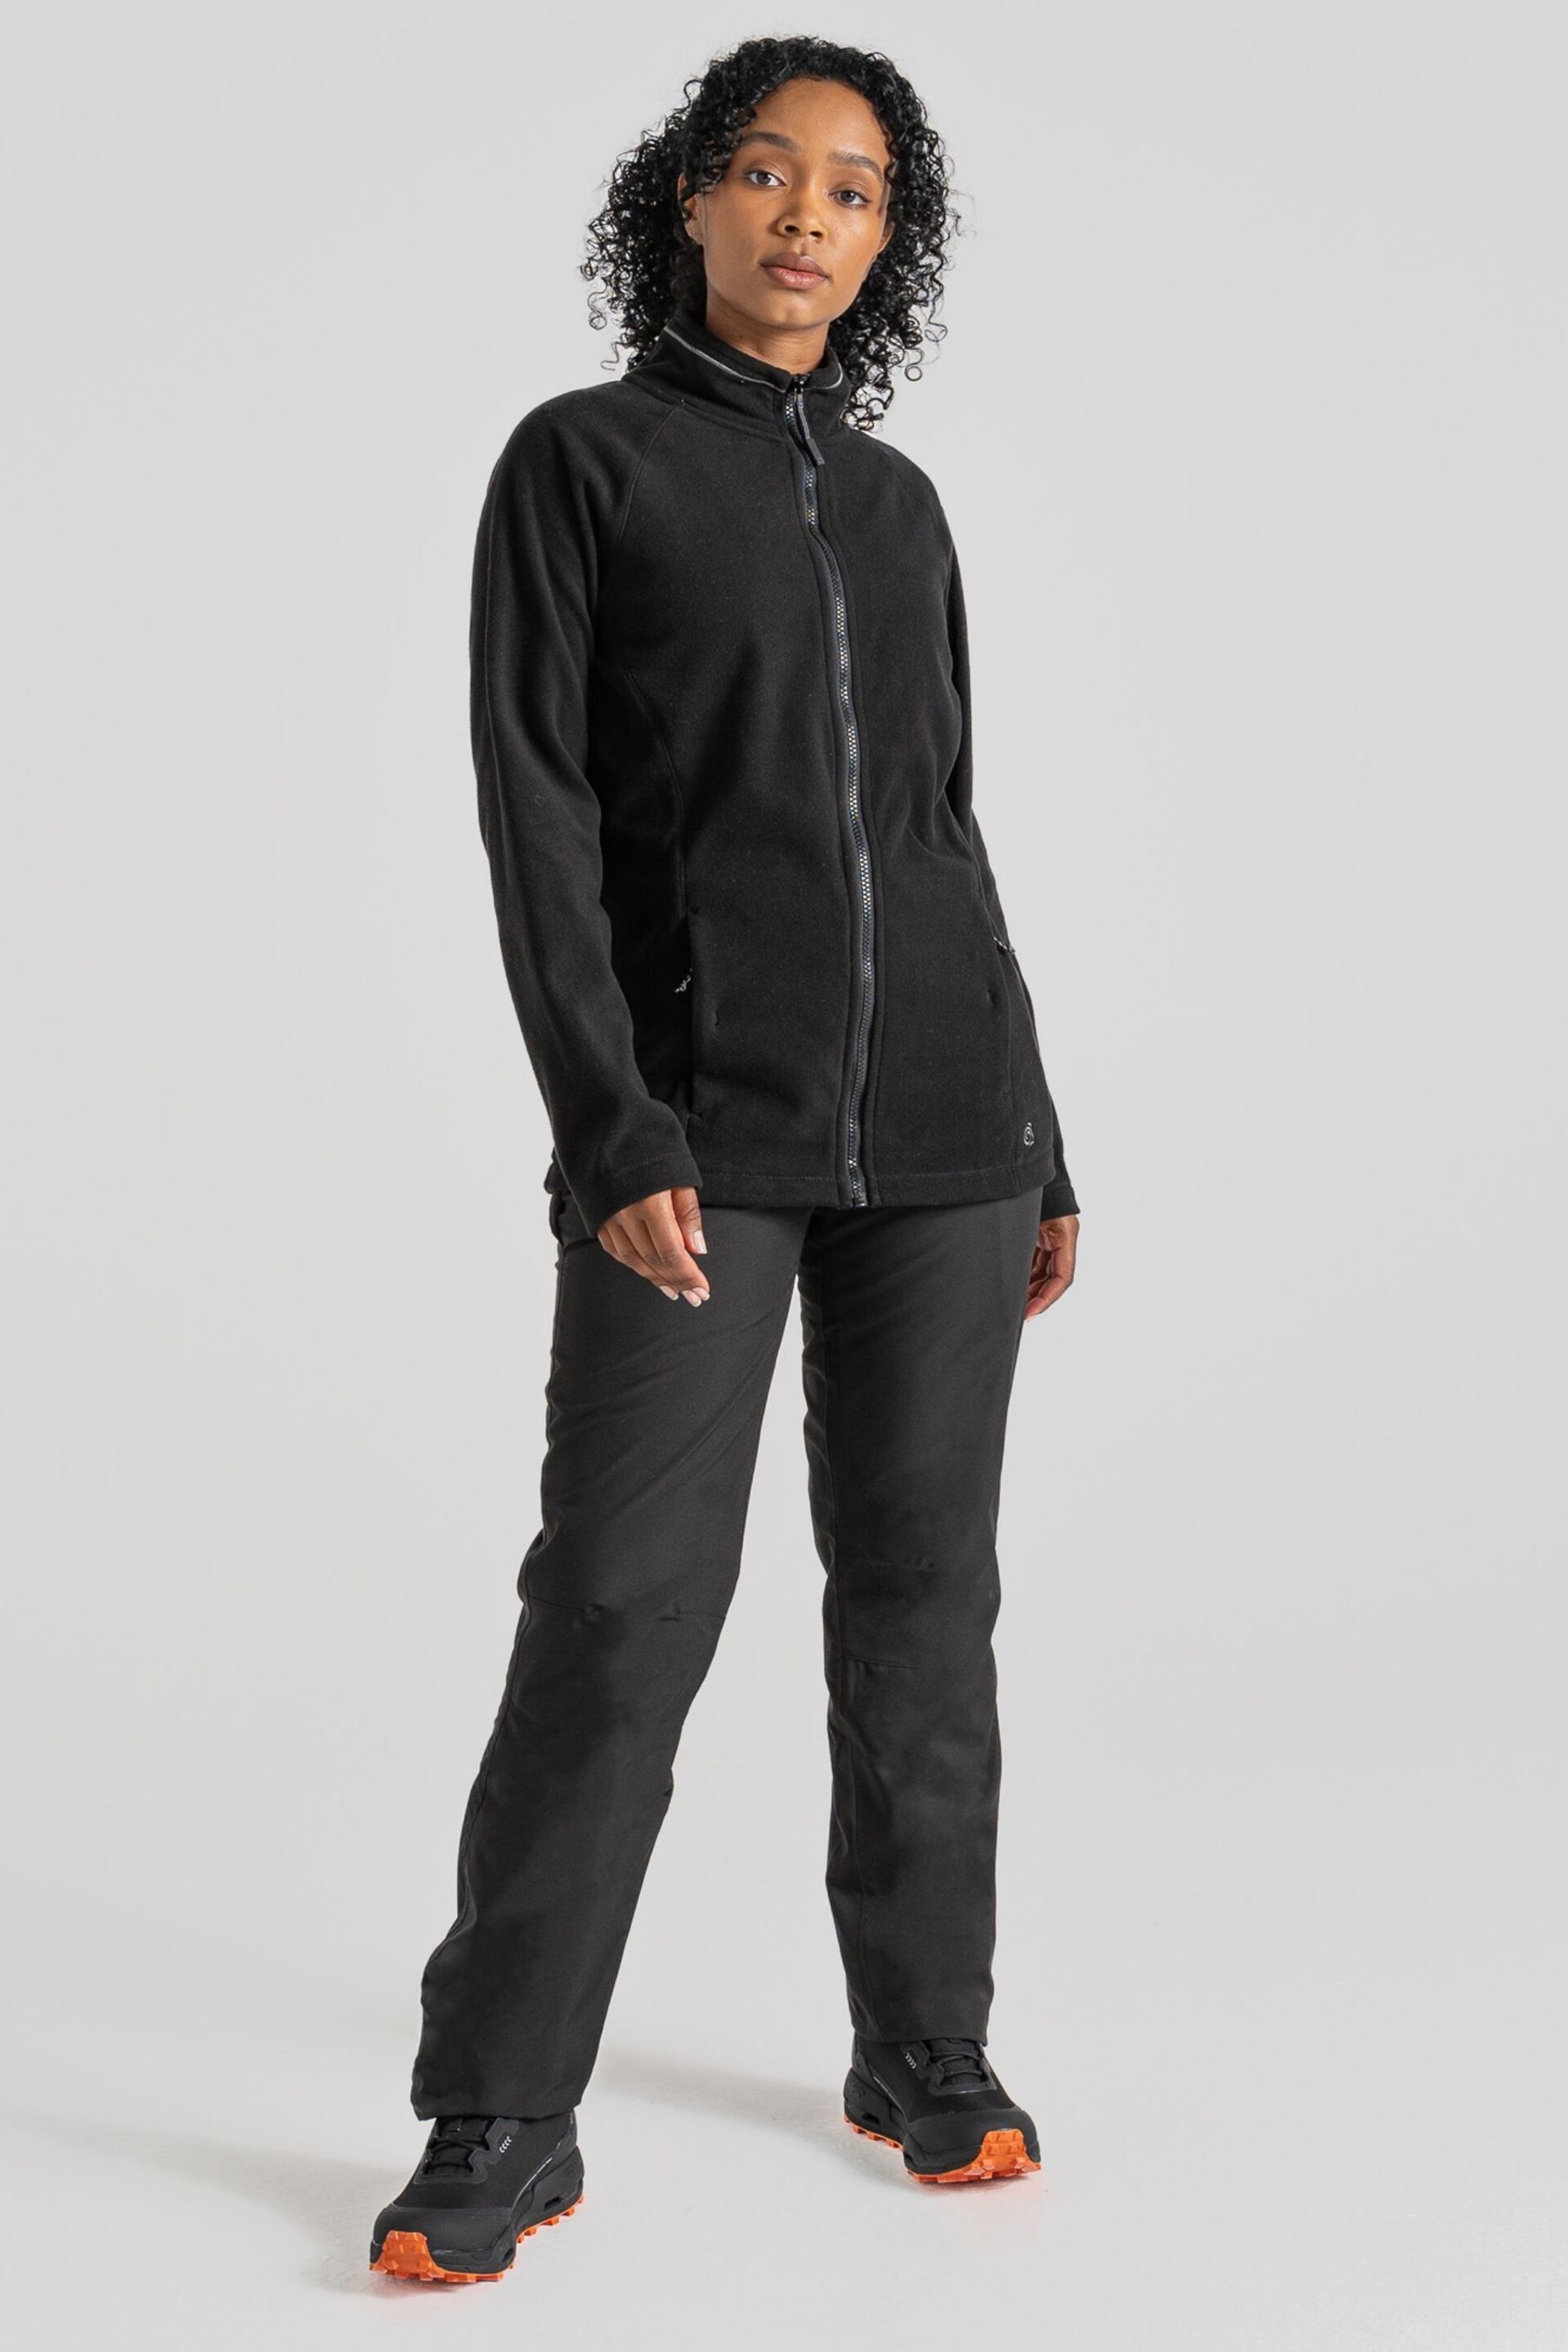 Craghoppers Aysgarth Black Thermo Trousers - Image 3 of 6